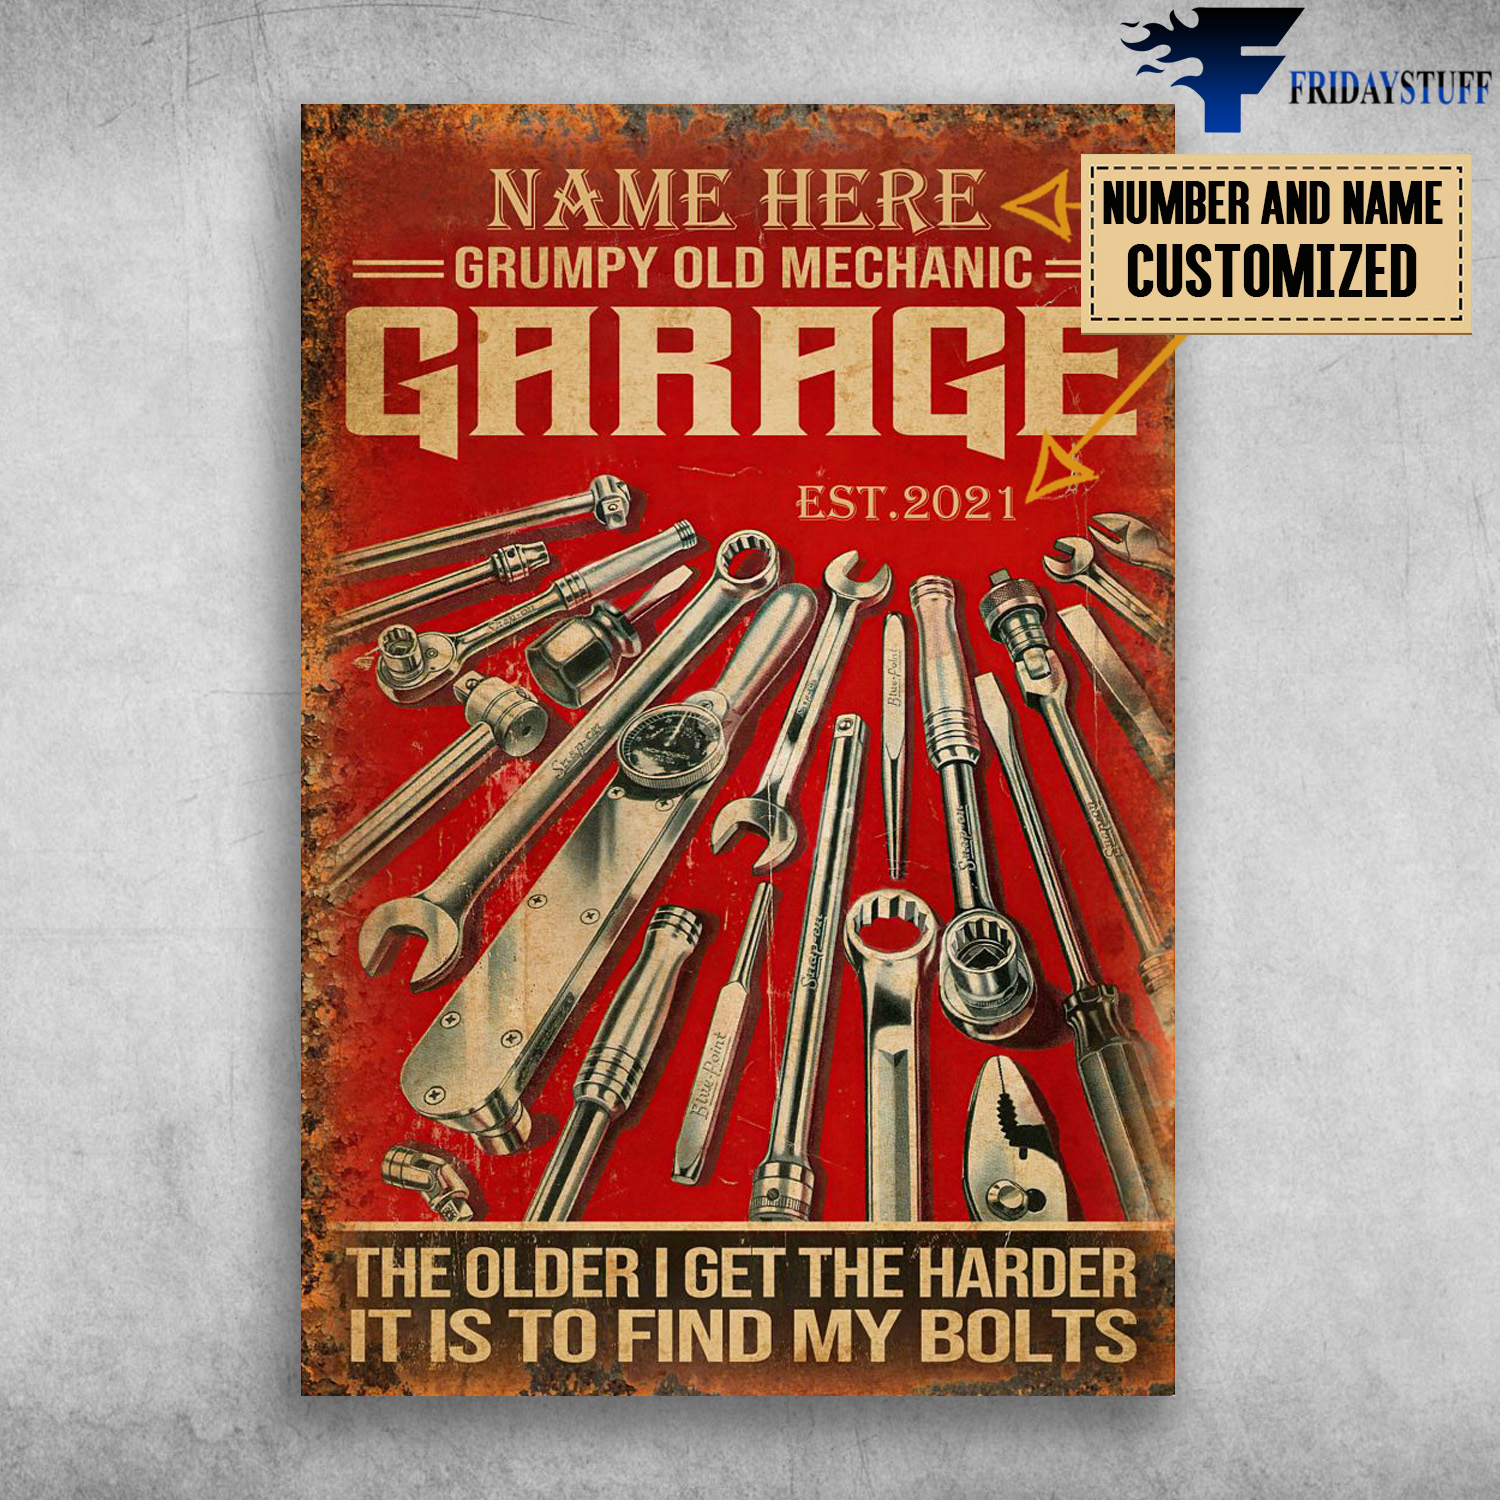 Grumpy Old Mechanic Garage,The Older I Get The Harder, It Is To Find My Bolts